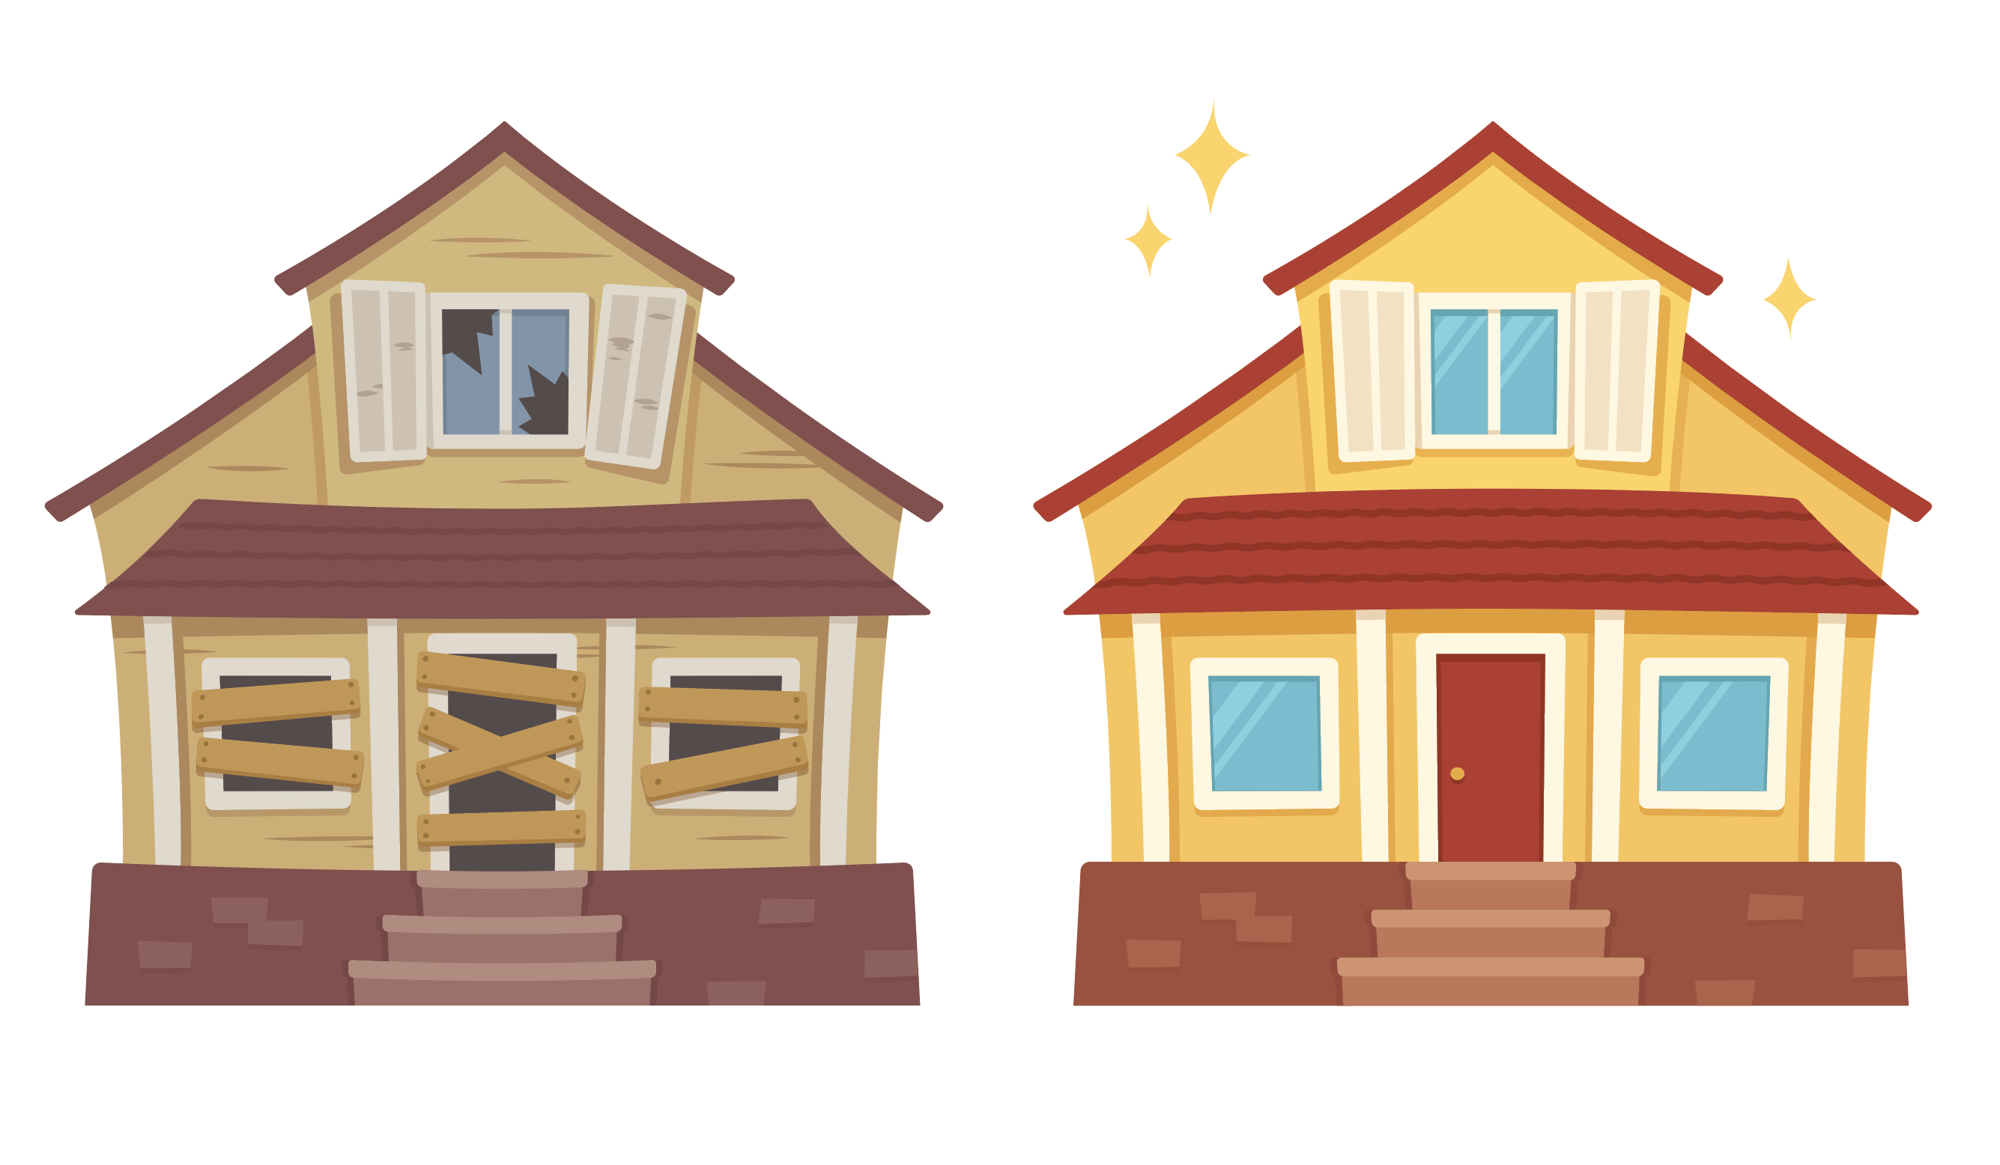 Concept of flipping houses